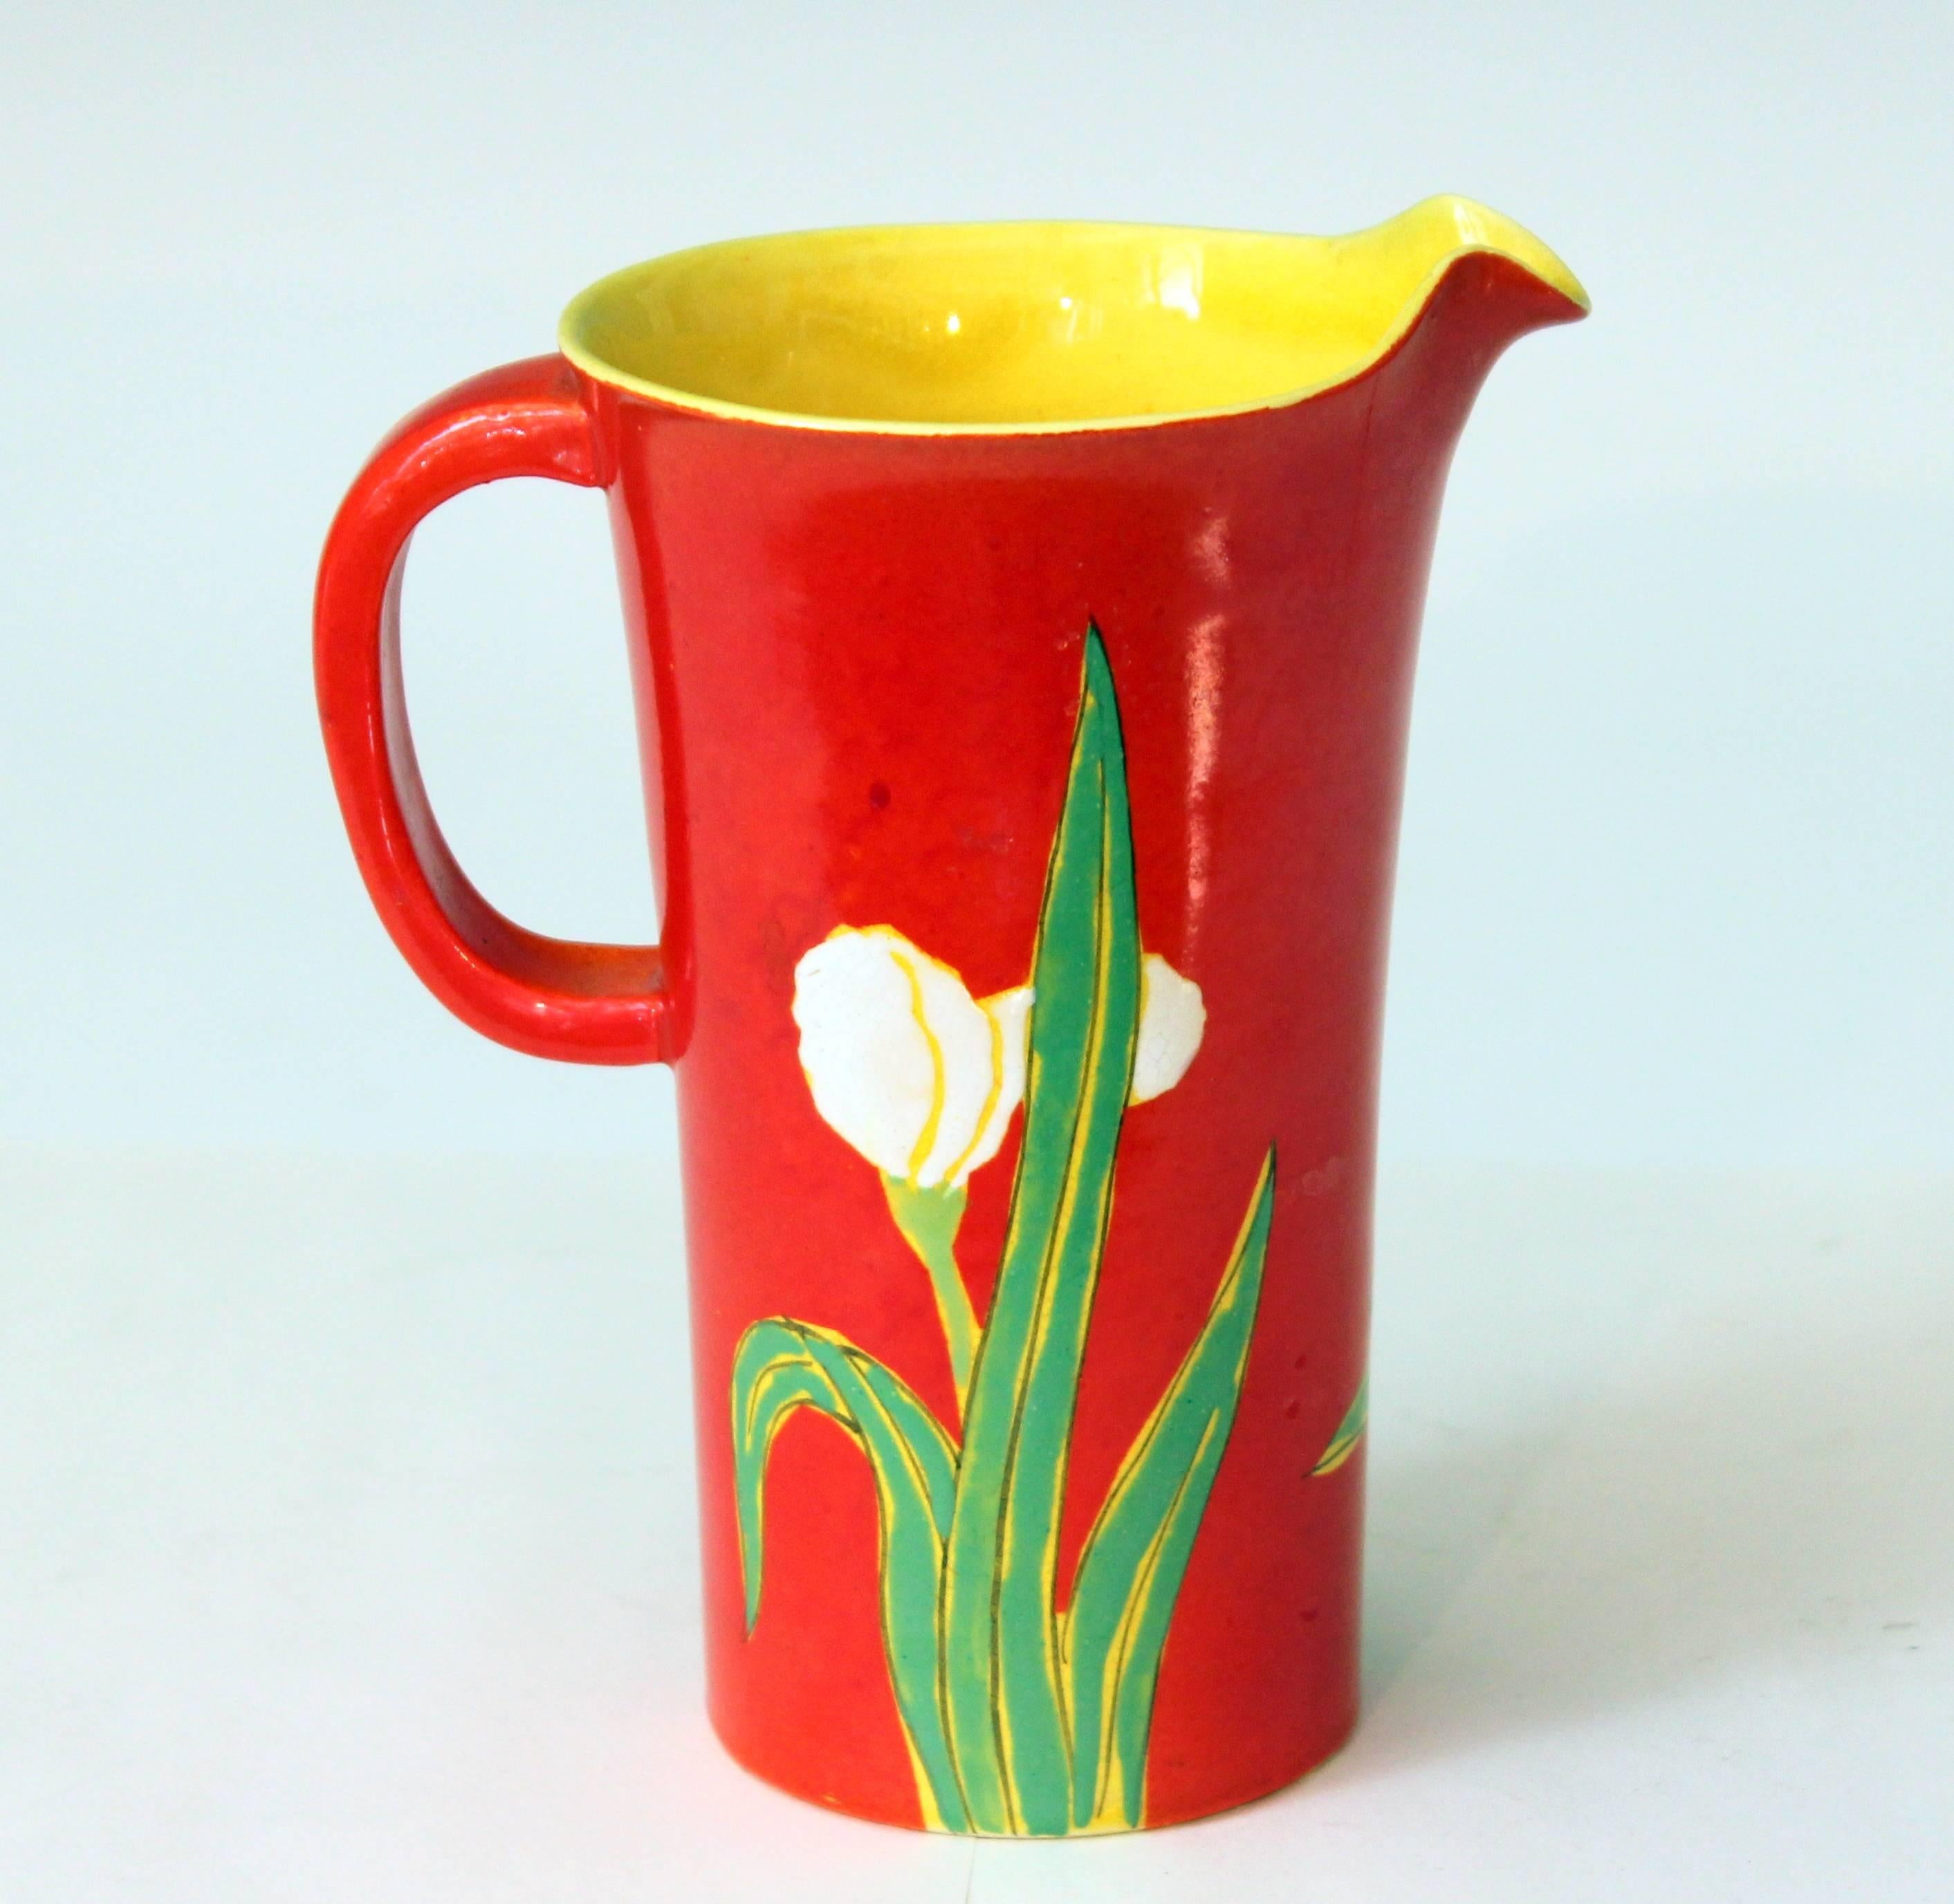 Vintage Awaji pottery iris pitcher decorated with irises in tactile enamels against an electric chrome red ground, circa 1920s. Incised potter's mark. Measures: 6